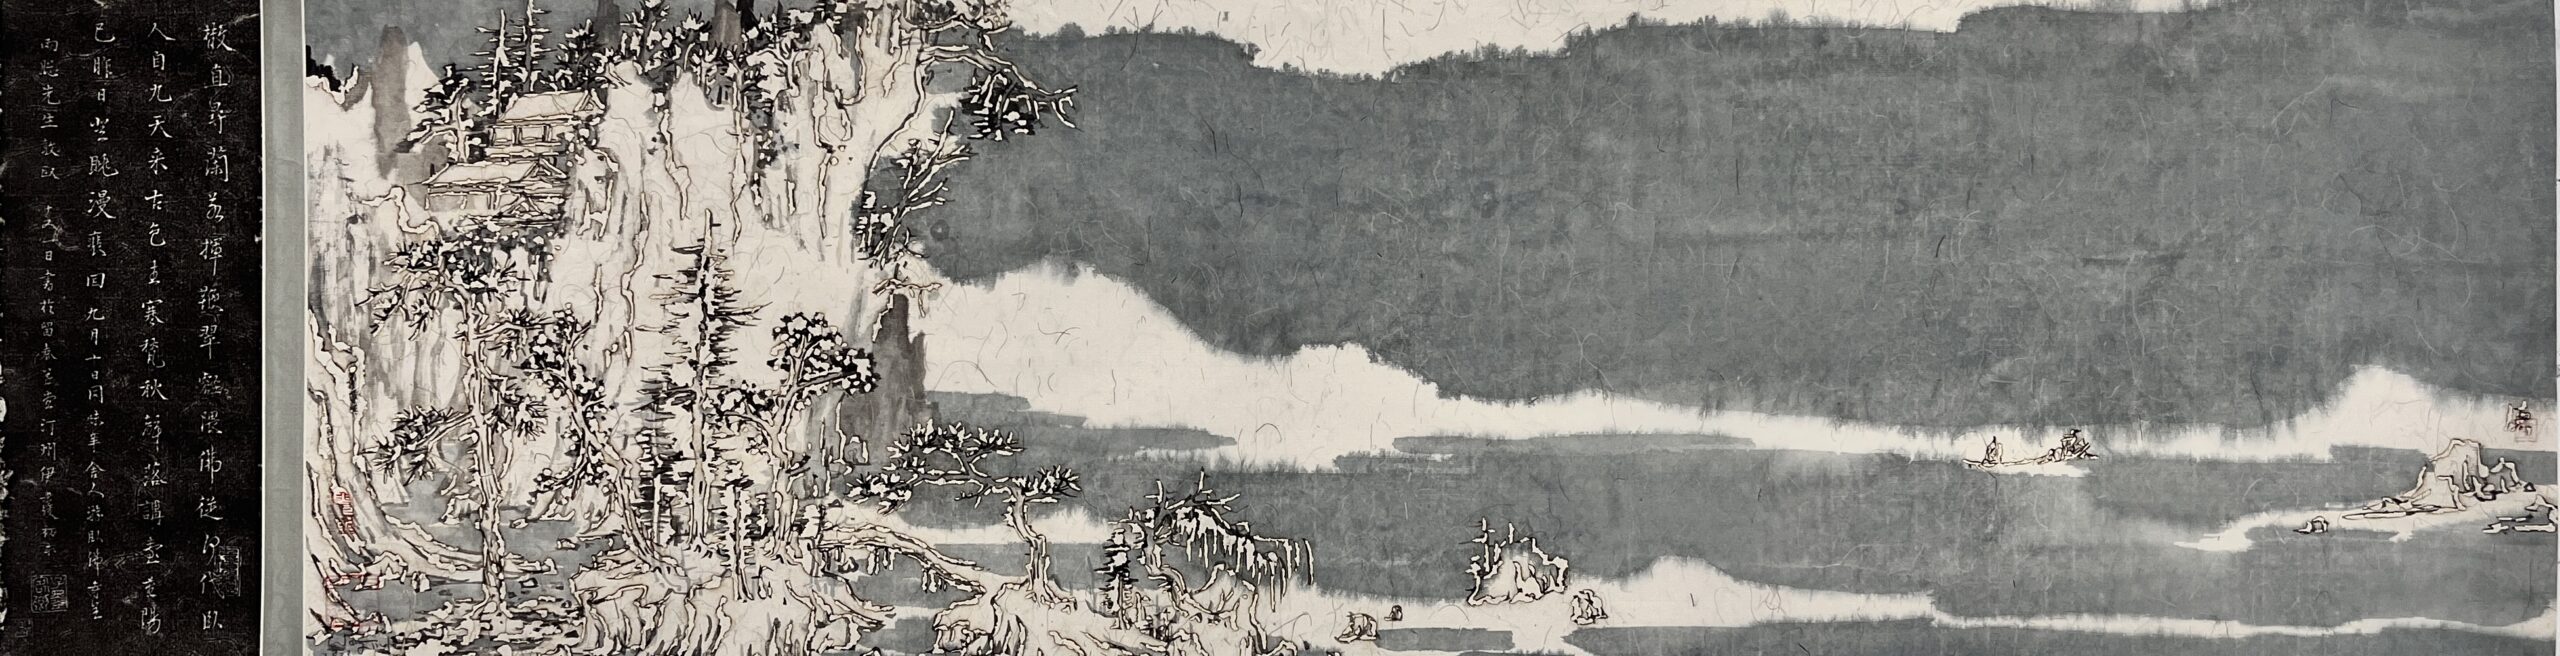 Wang Tiande, Fishermen by the Lake and Mountains, 2023, Chinese ink & colour with burn marks on layered rice paper, stele rubbing from Qing Dynasty, 36x133.5cm